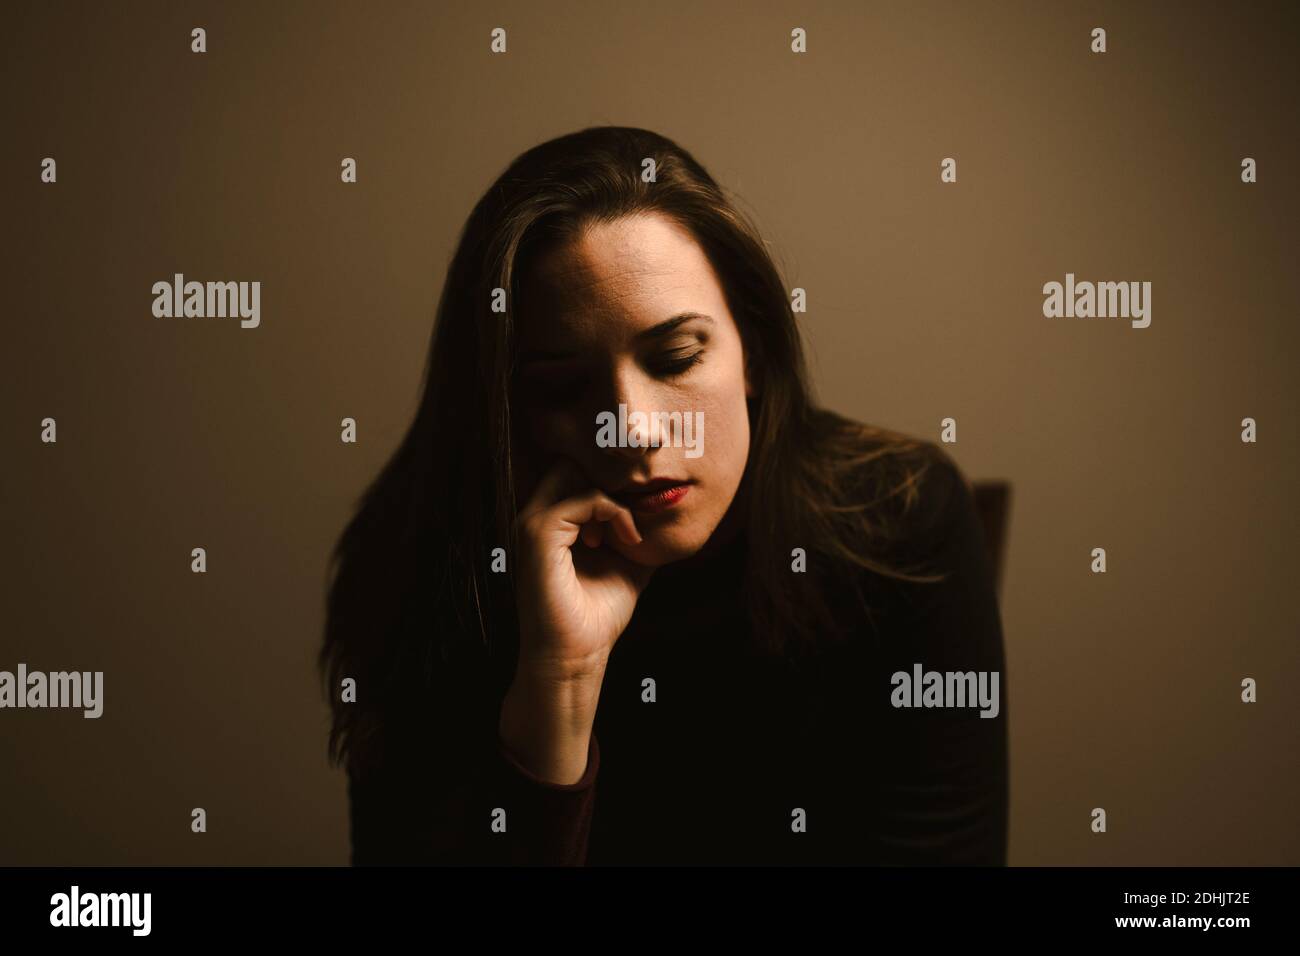 Unhappy pensive young female in black wear leaning on hand and thinking about personal problems while sitting against brown wall Stock Photo